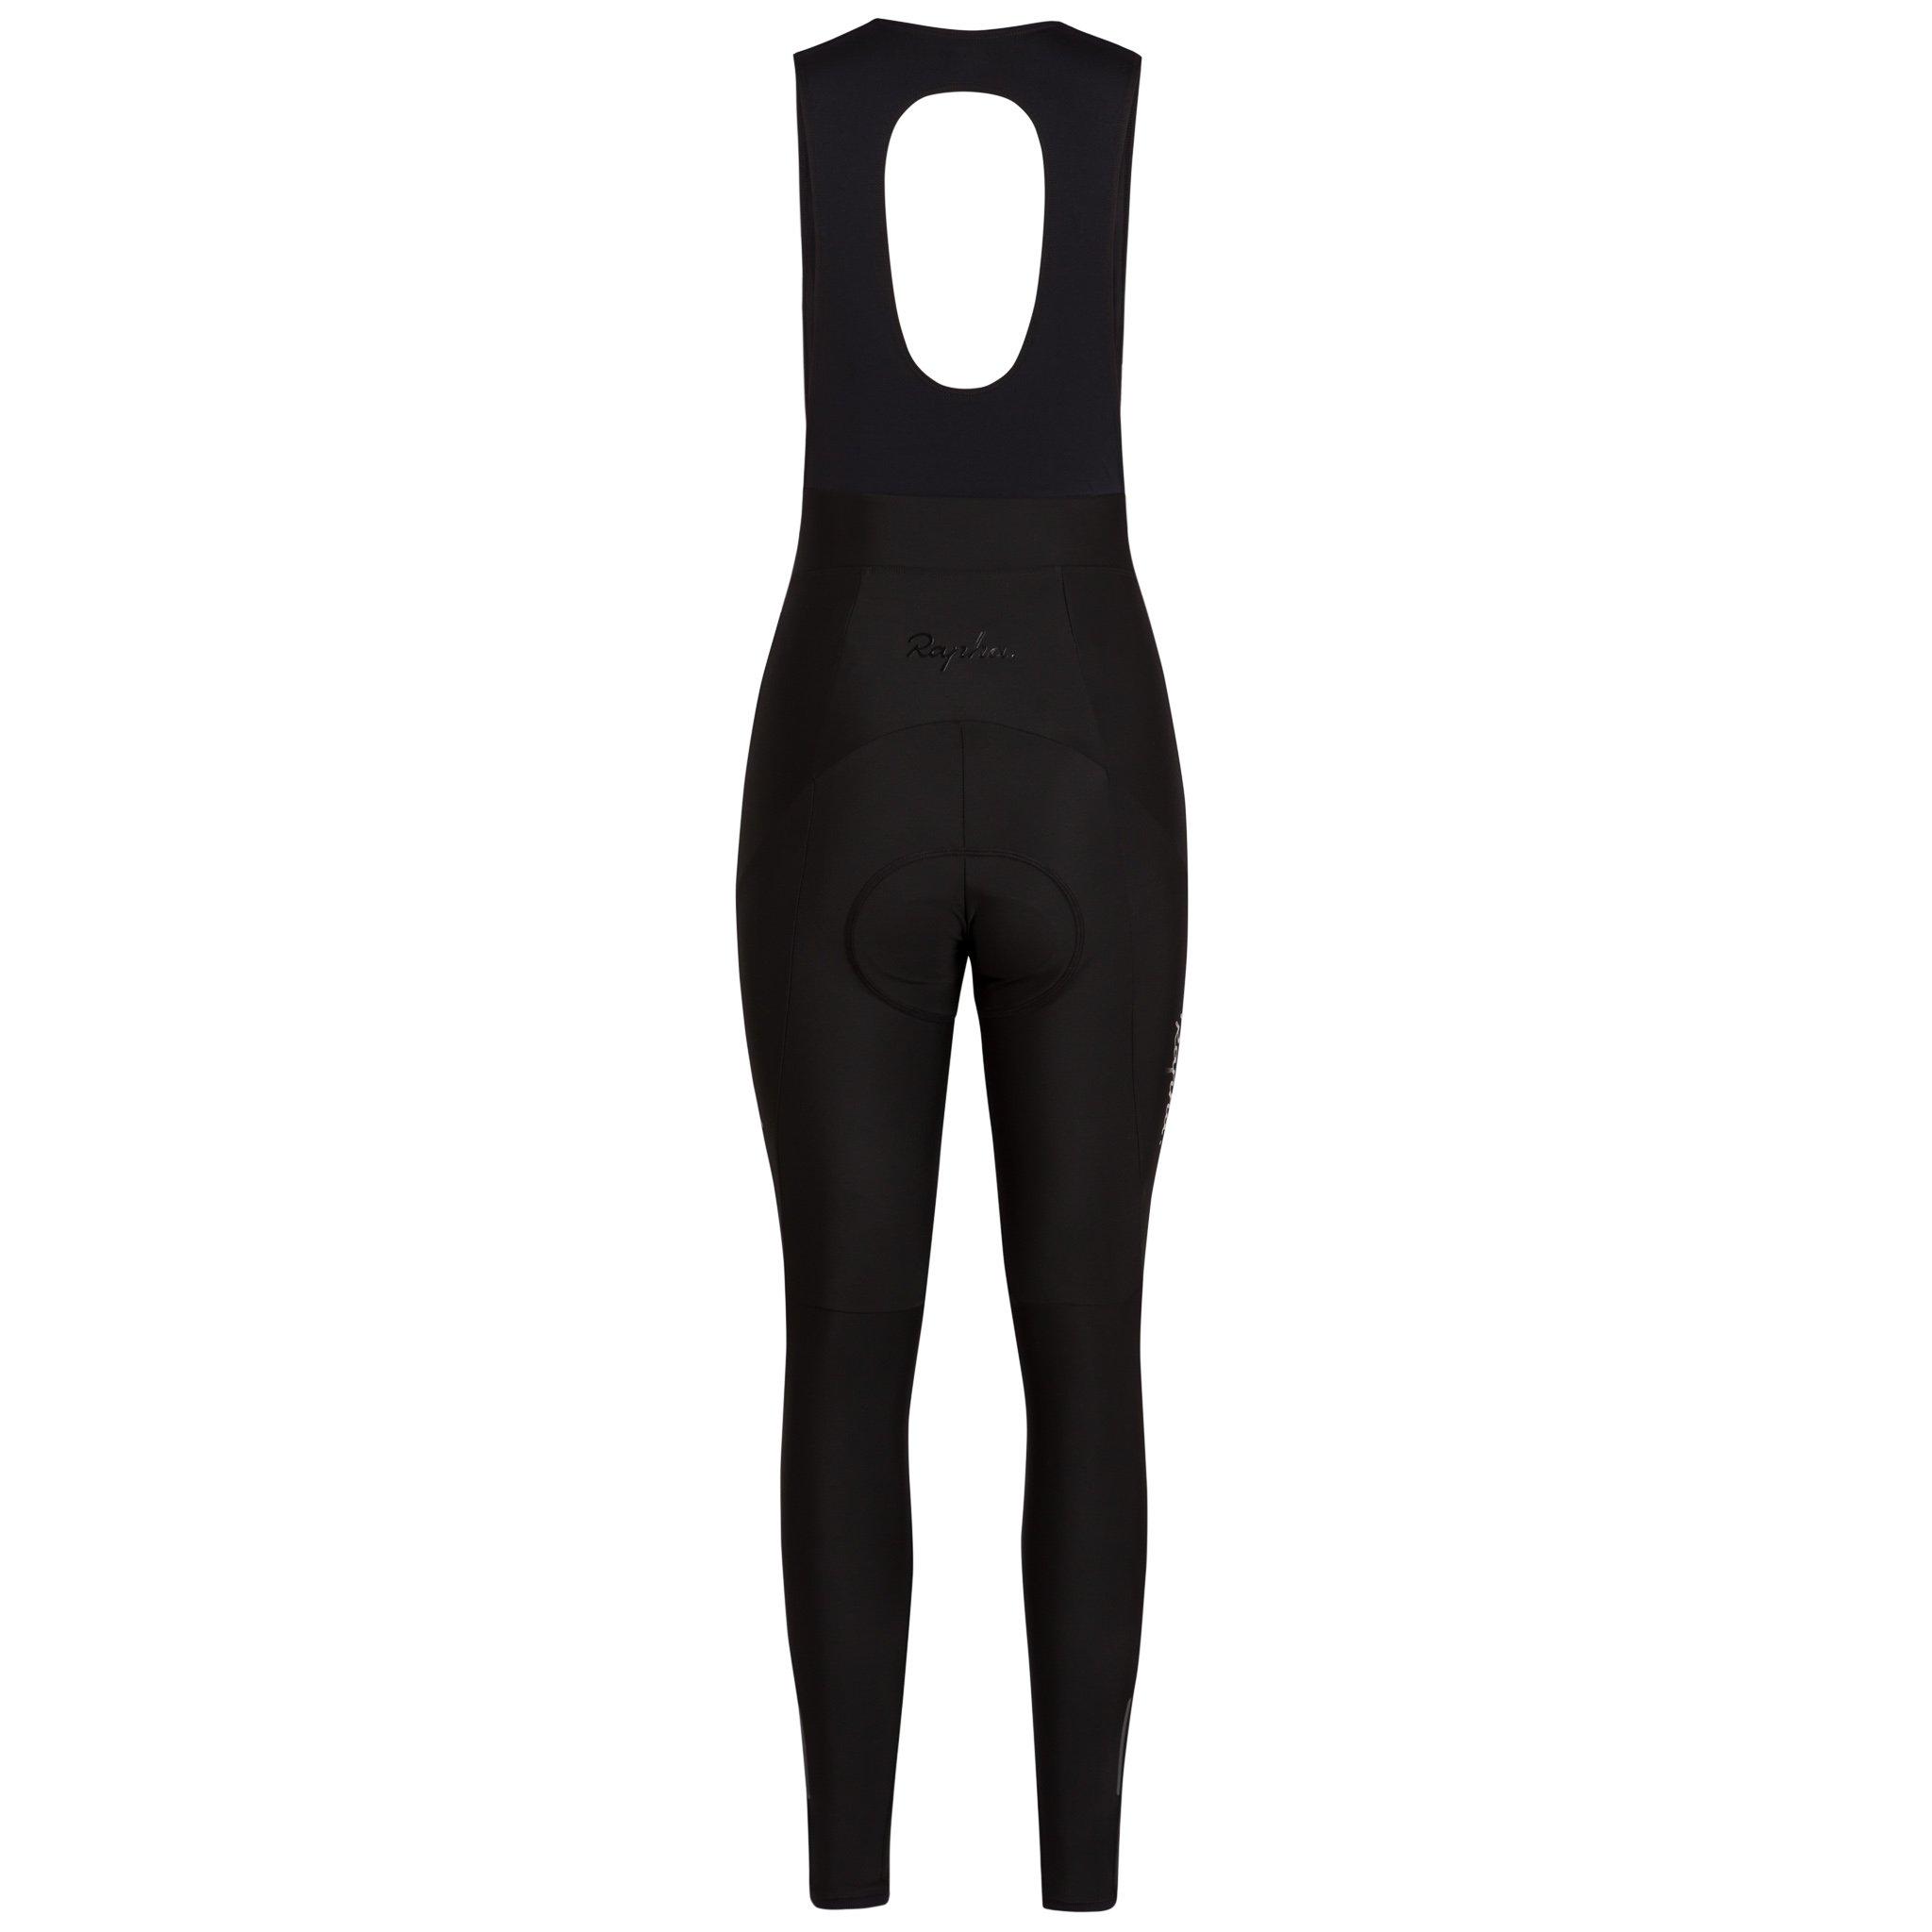 Buy Womens Winter Long Cycling Pants with Chamois